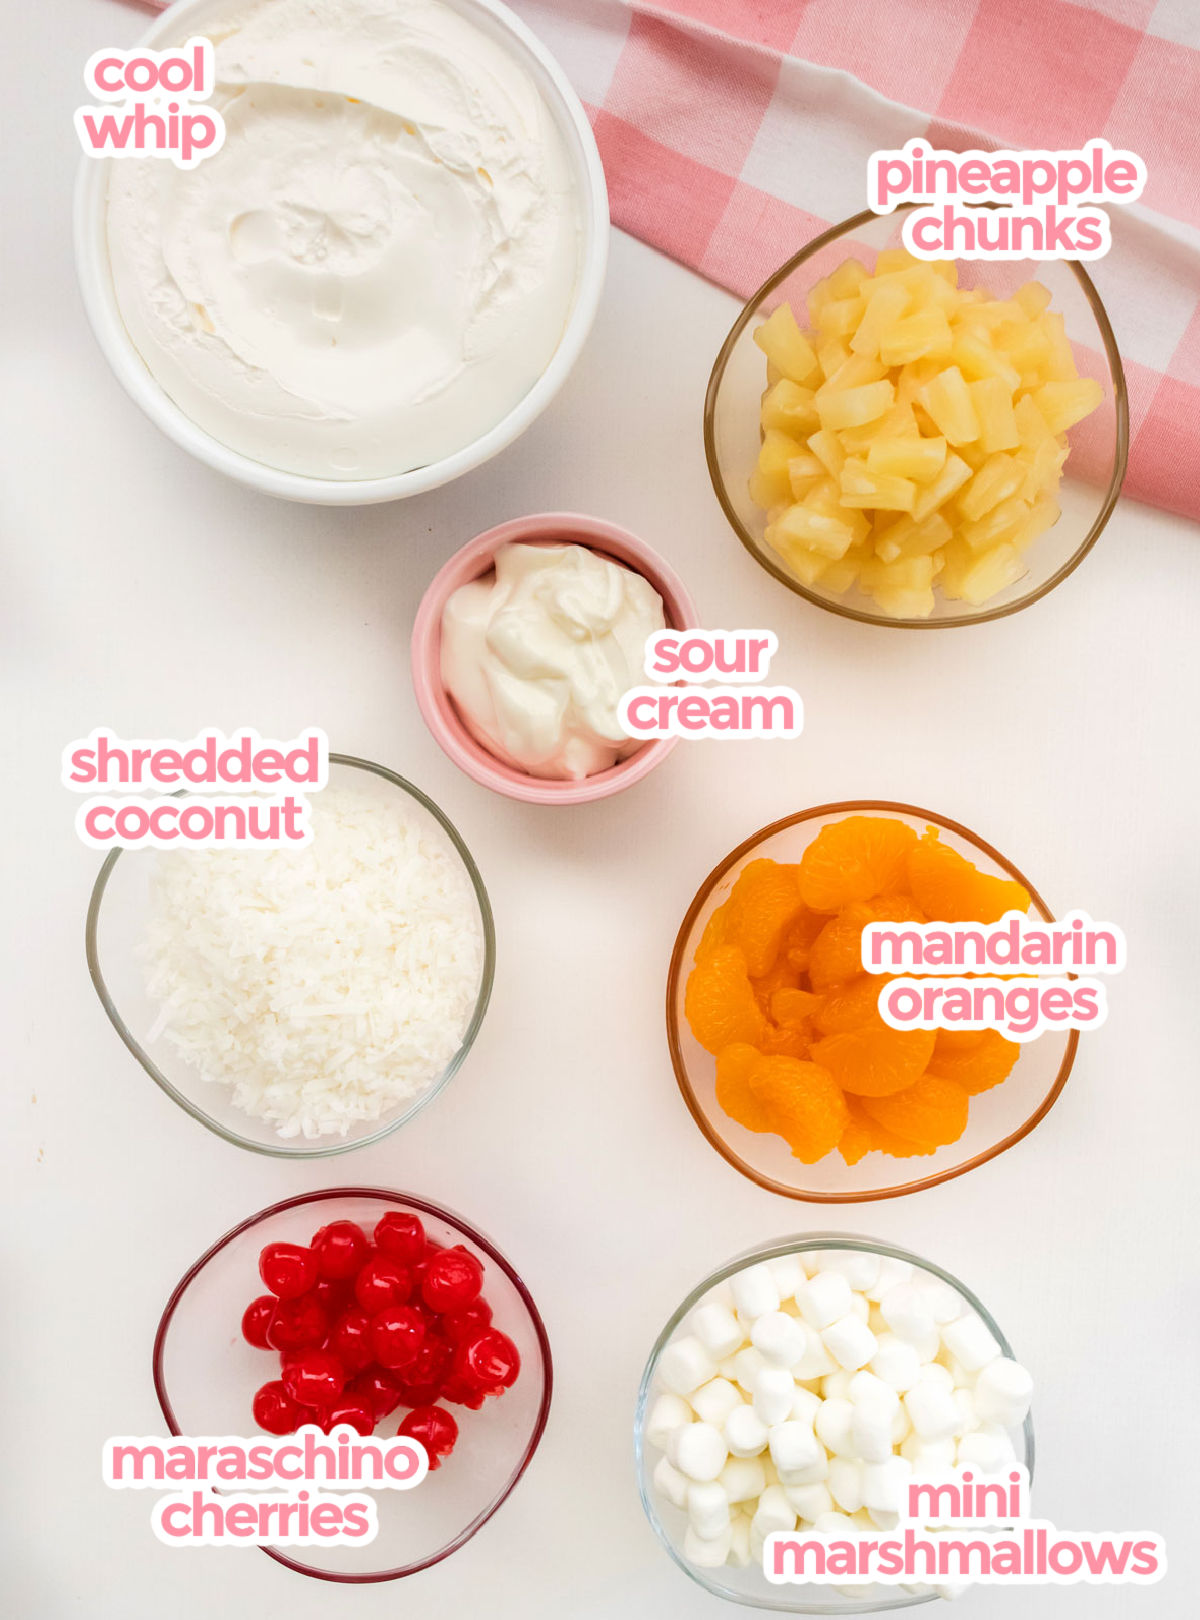 All the ingredients you will need to make Ambrosia Salad including Cool Whip, Pineapple Chunks, Sour Cream, Shredded Coconut, Mandarin Oranges, Maraschino Cherries and Mini Marshmallows.